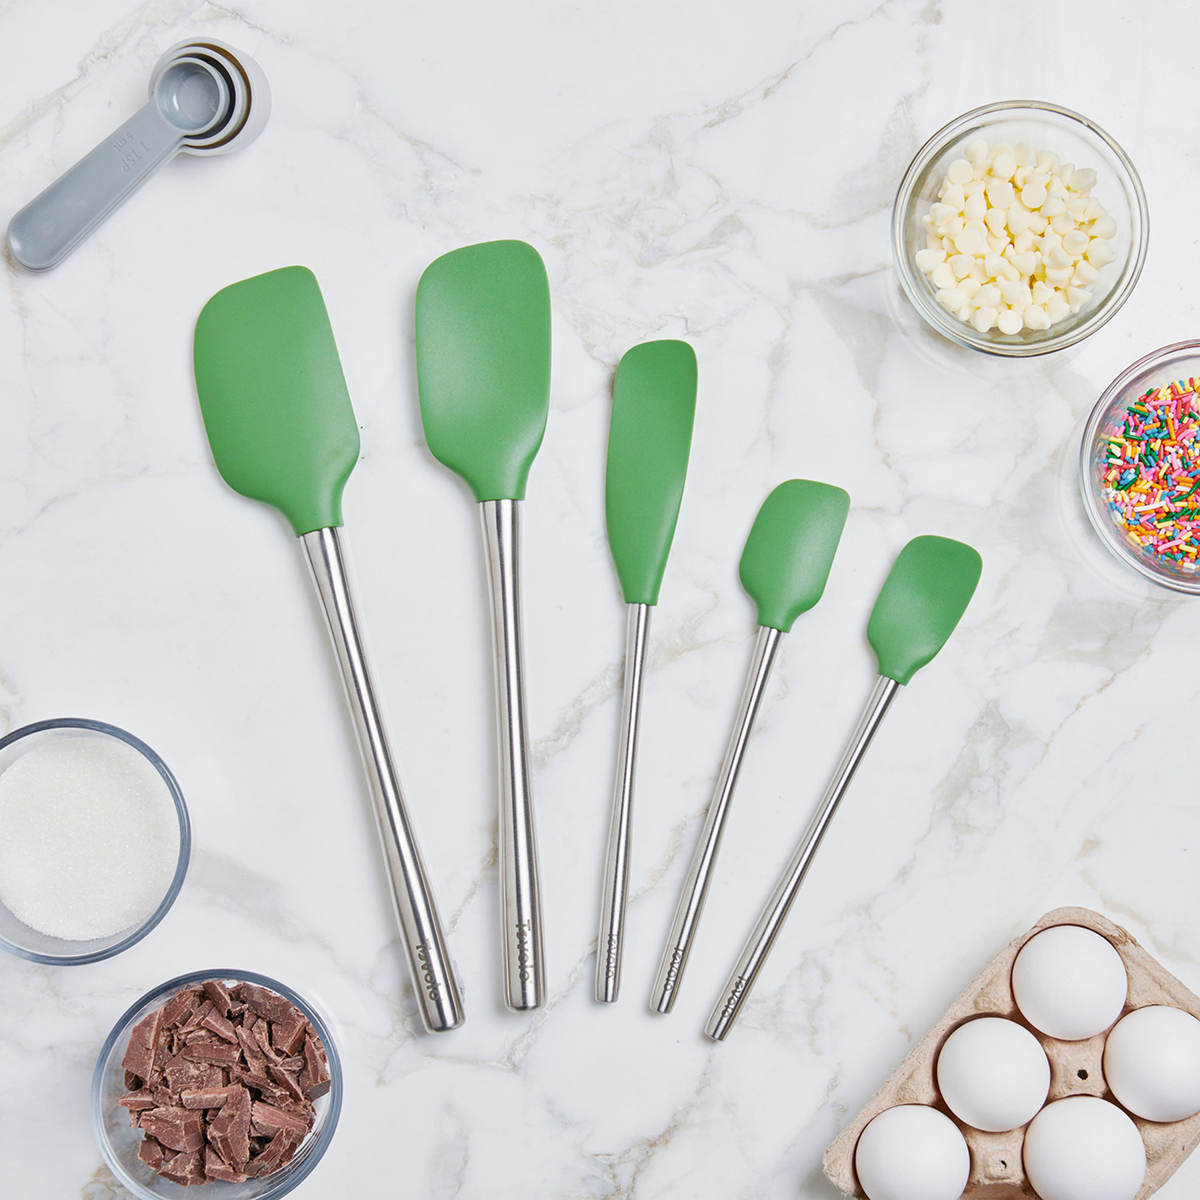 https://www.containerstore.com/catalogimages/514545/10098734_SS_Spatula_Set_of_5_Pesto_L.jpg